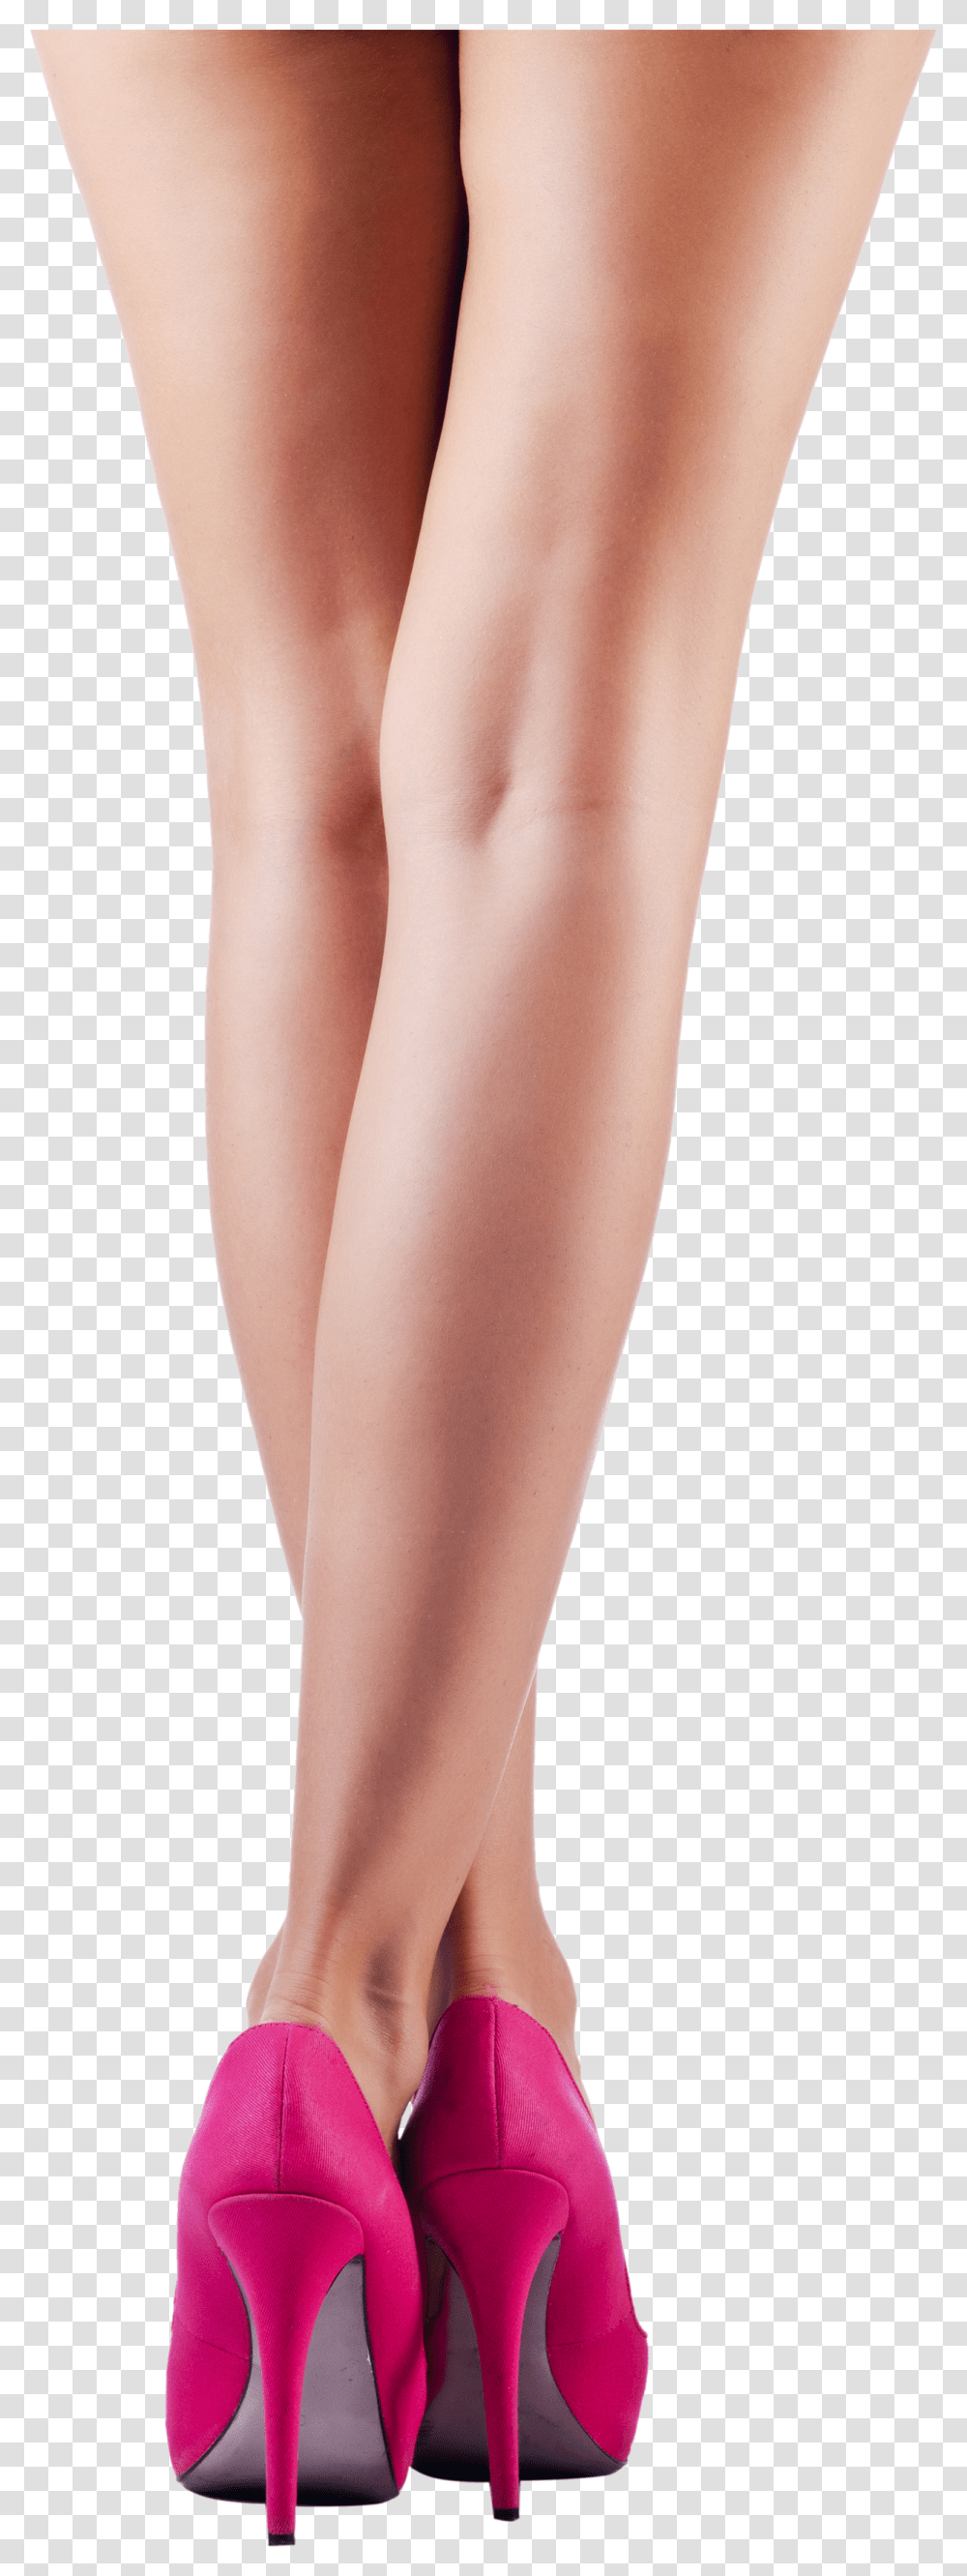 Legs Images Free Download Woman Legs Transparent Png